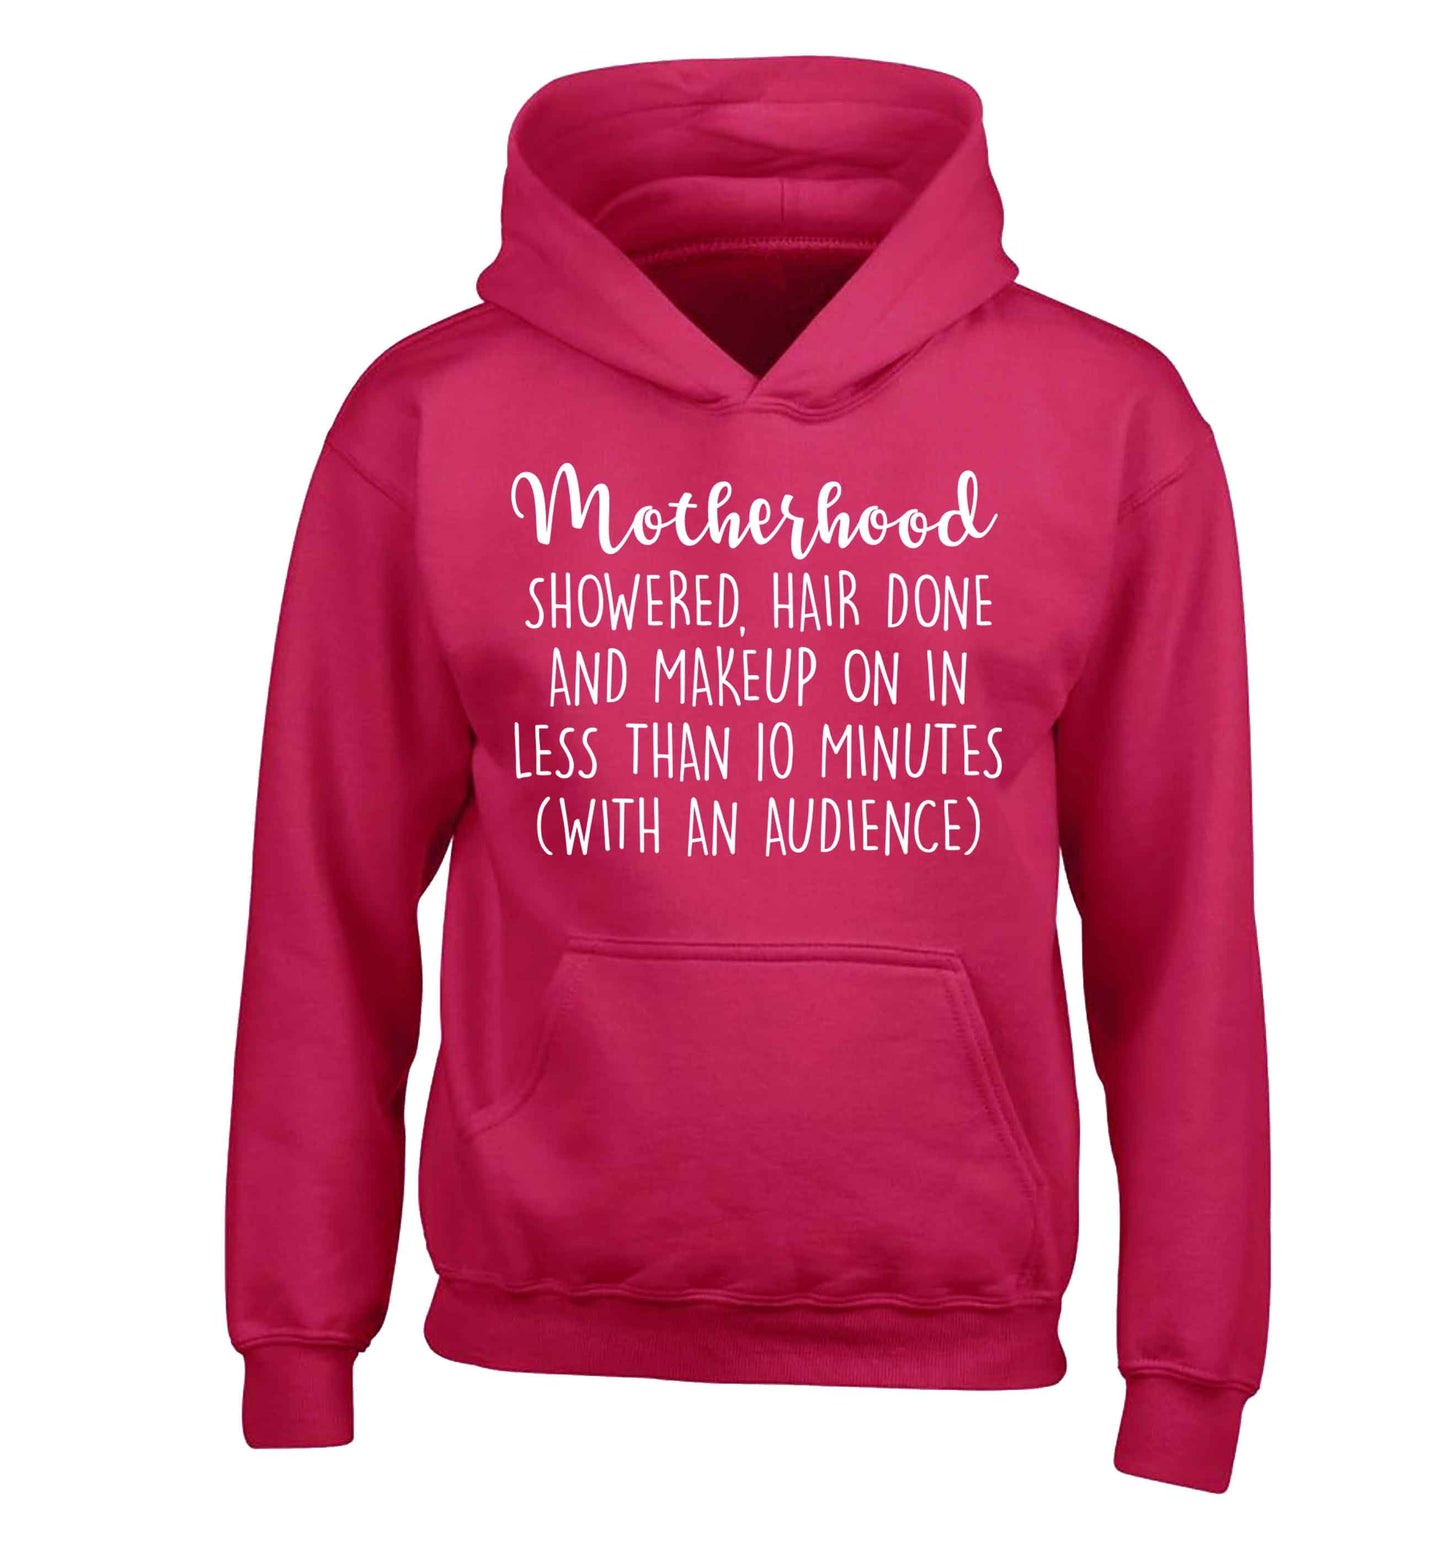 Motherhood, showered, hair done and makeup on children's pink hoodie 12-13 Years